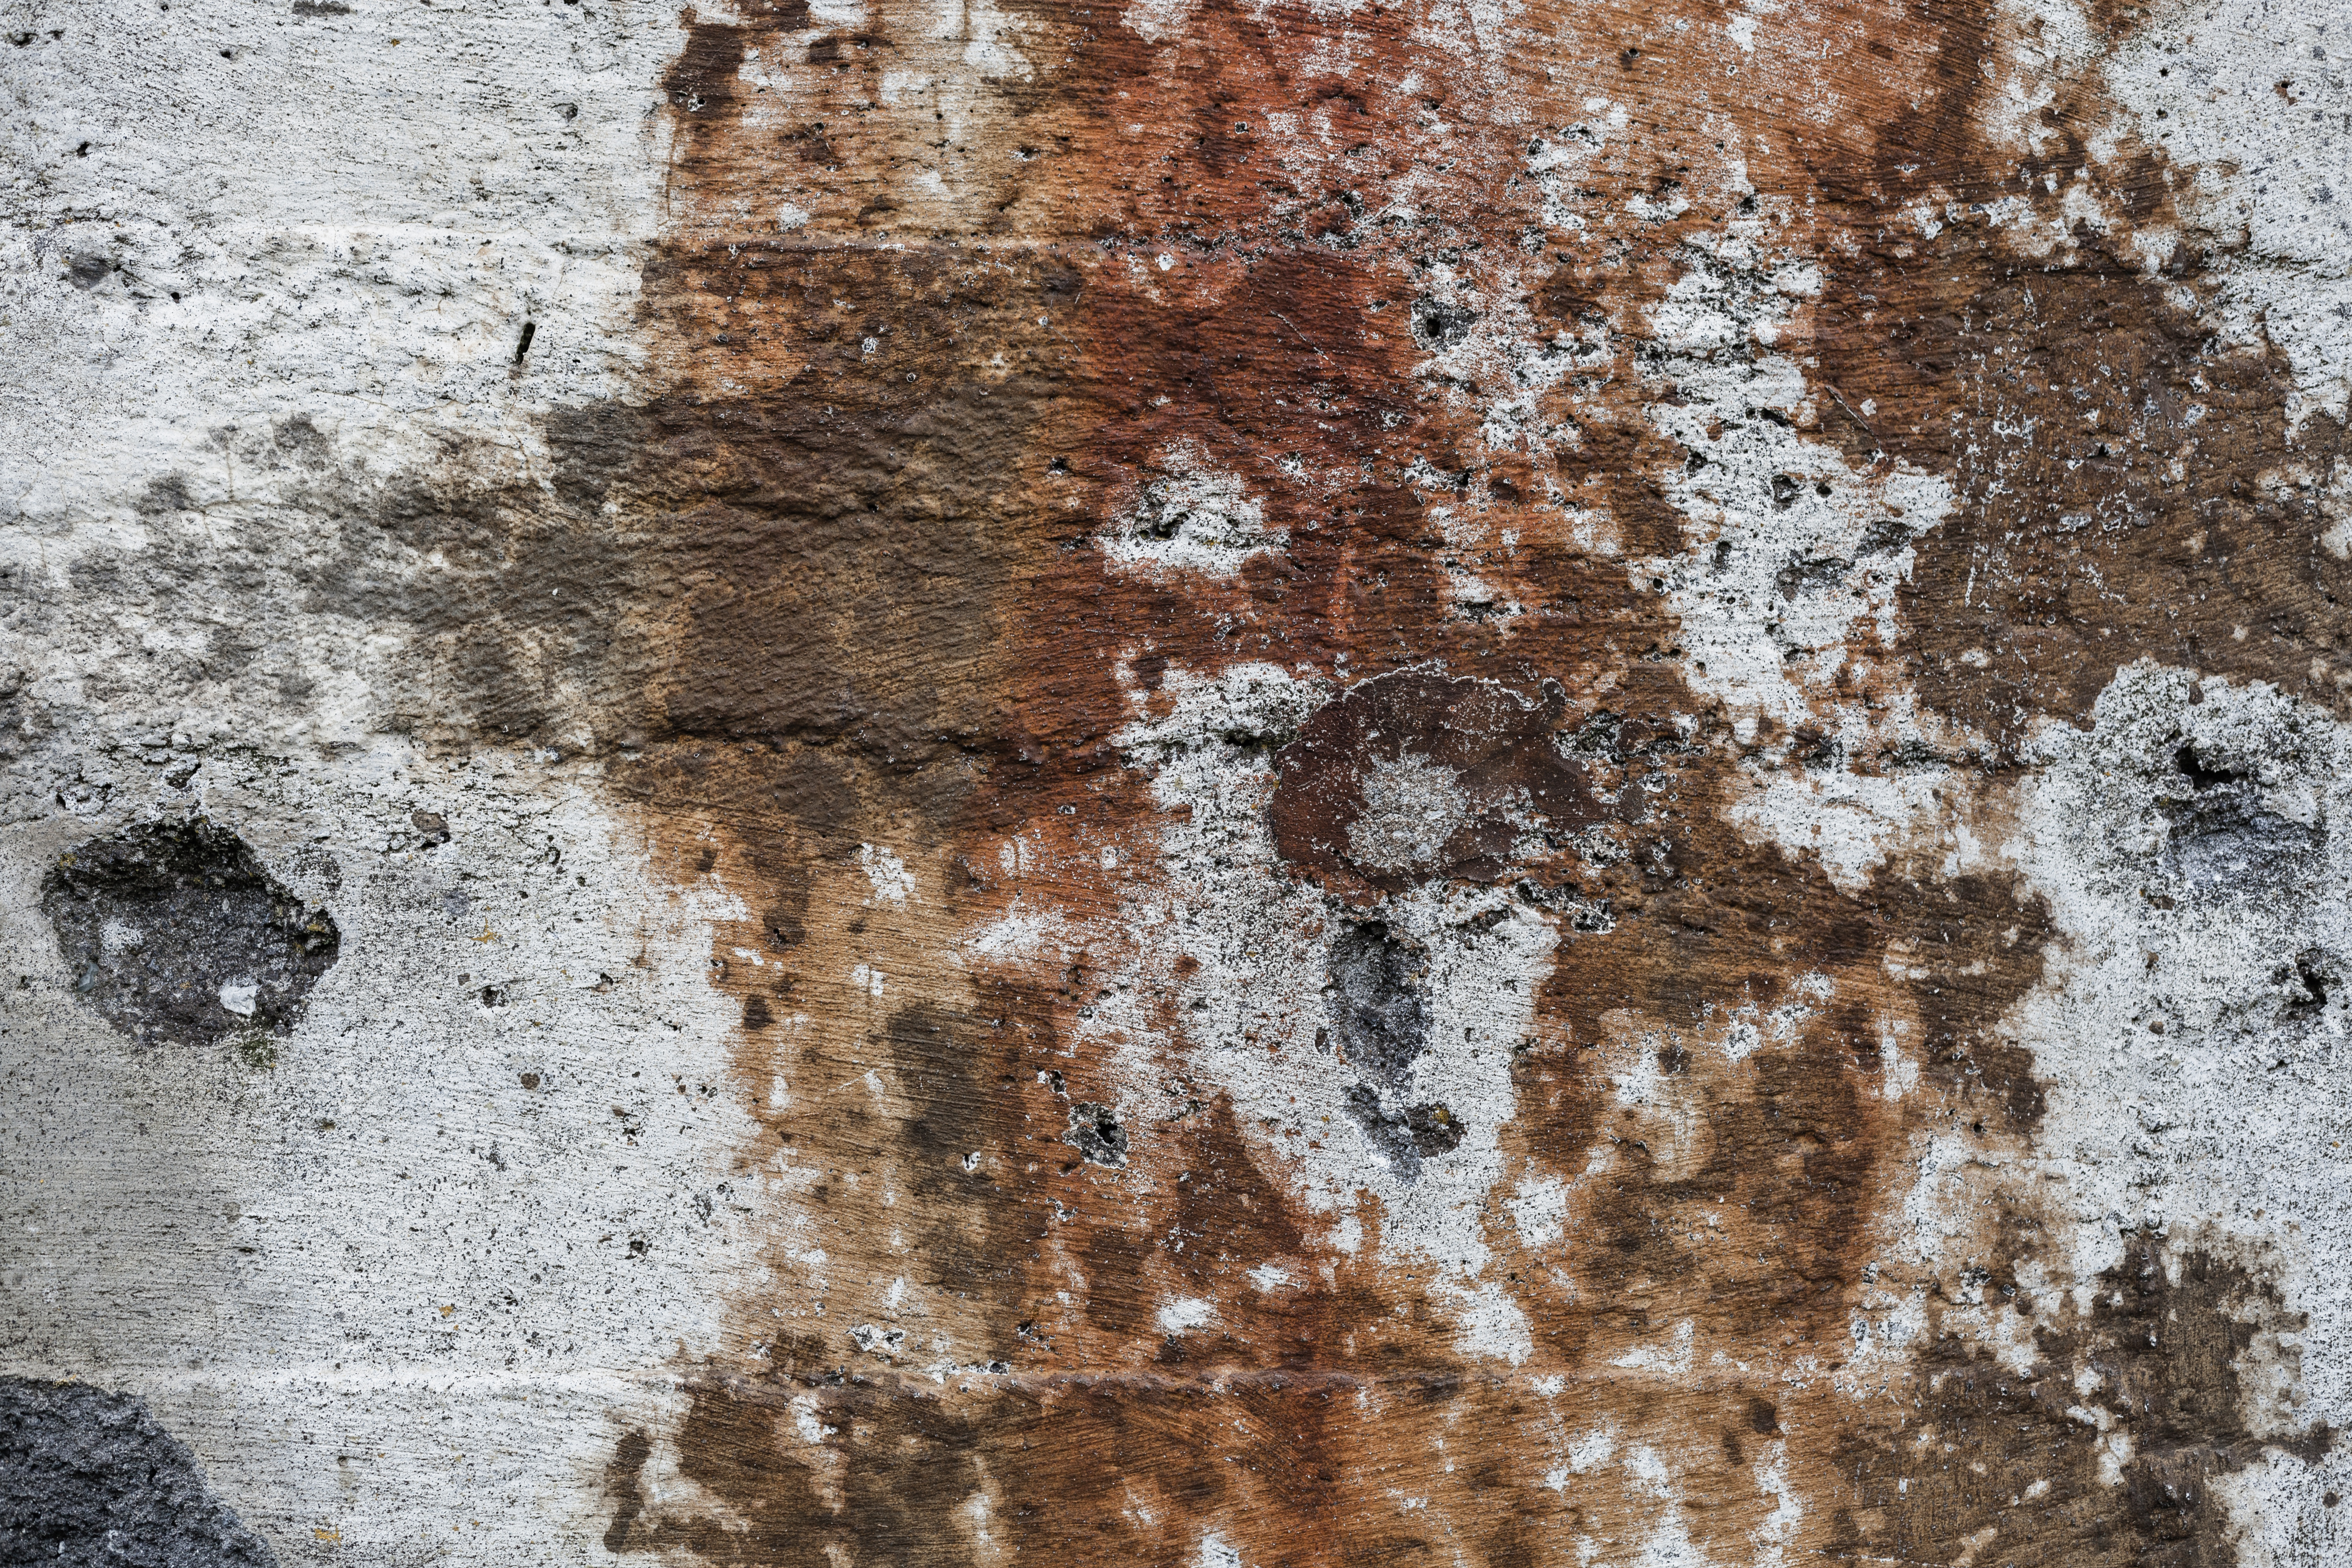 Gritty wall texture photo